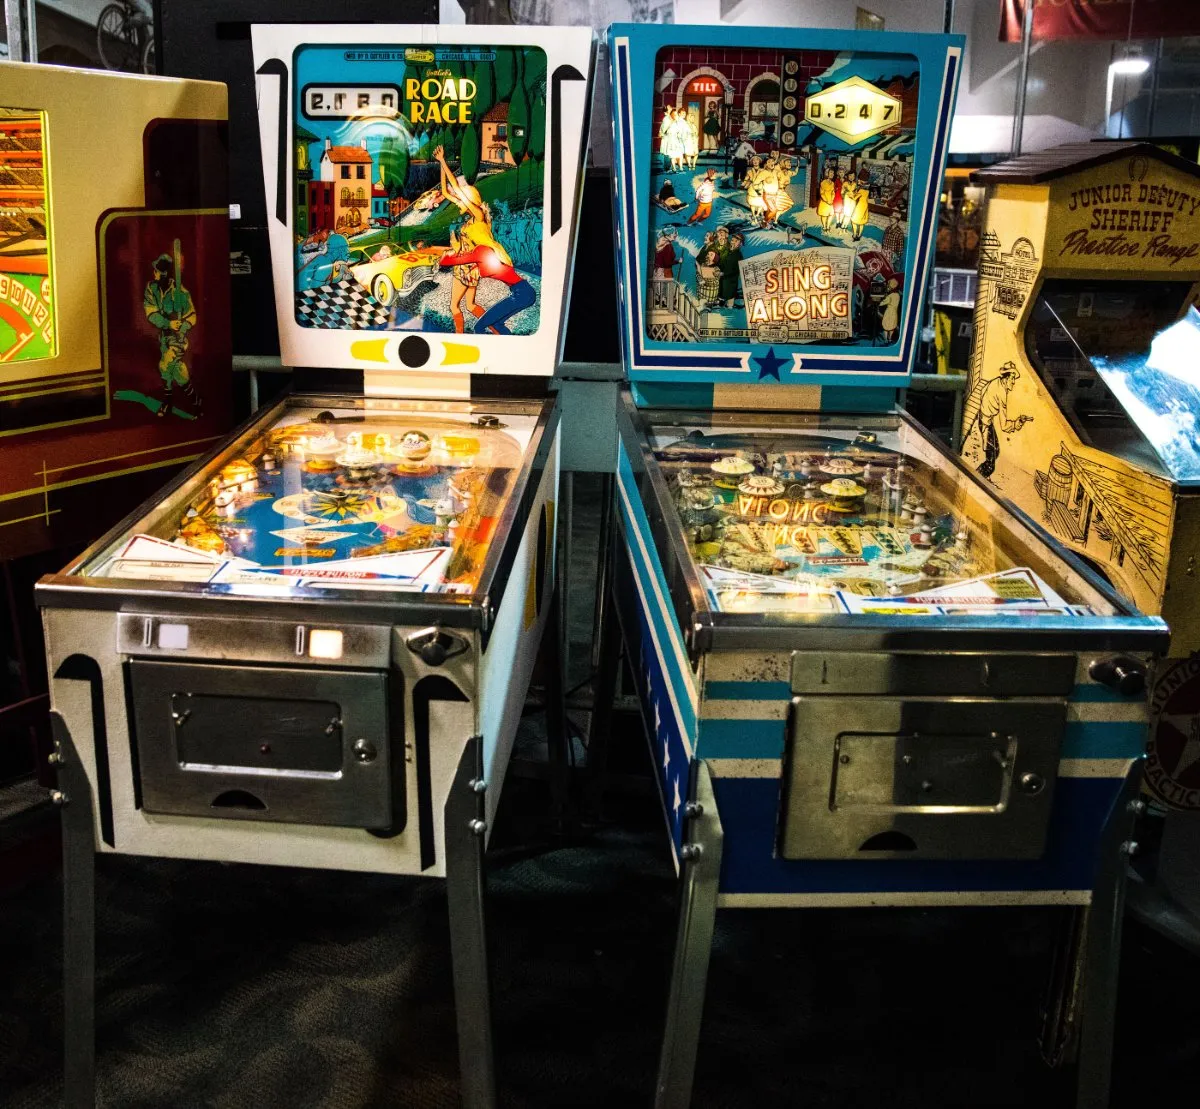 Two pinball machines side by side in a dark room with dim lighting